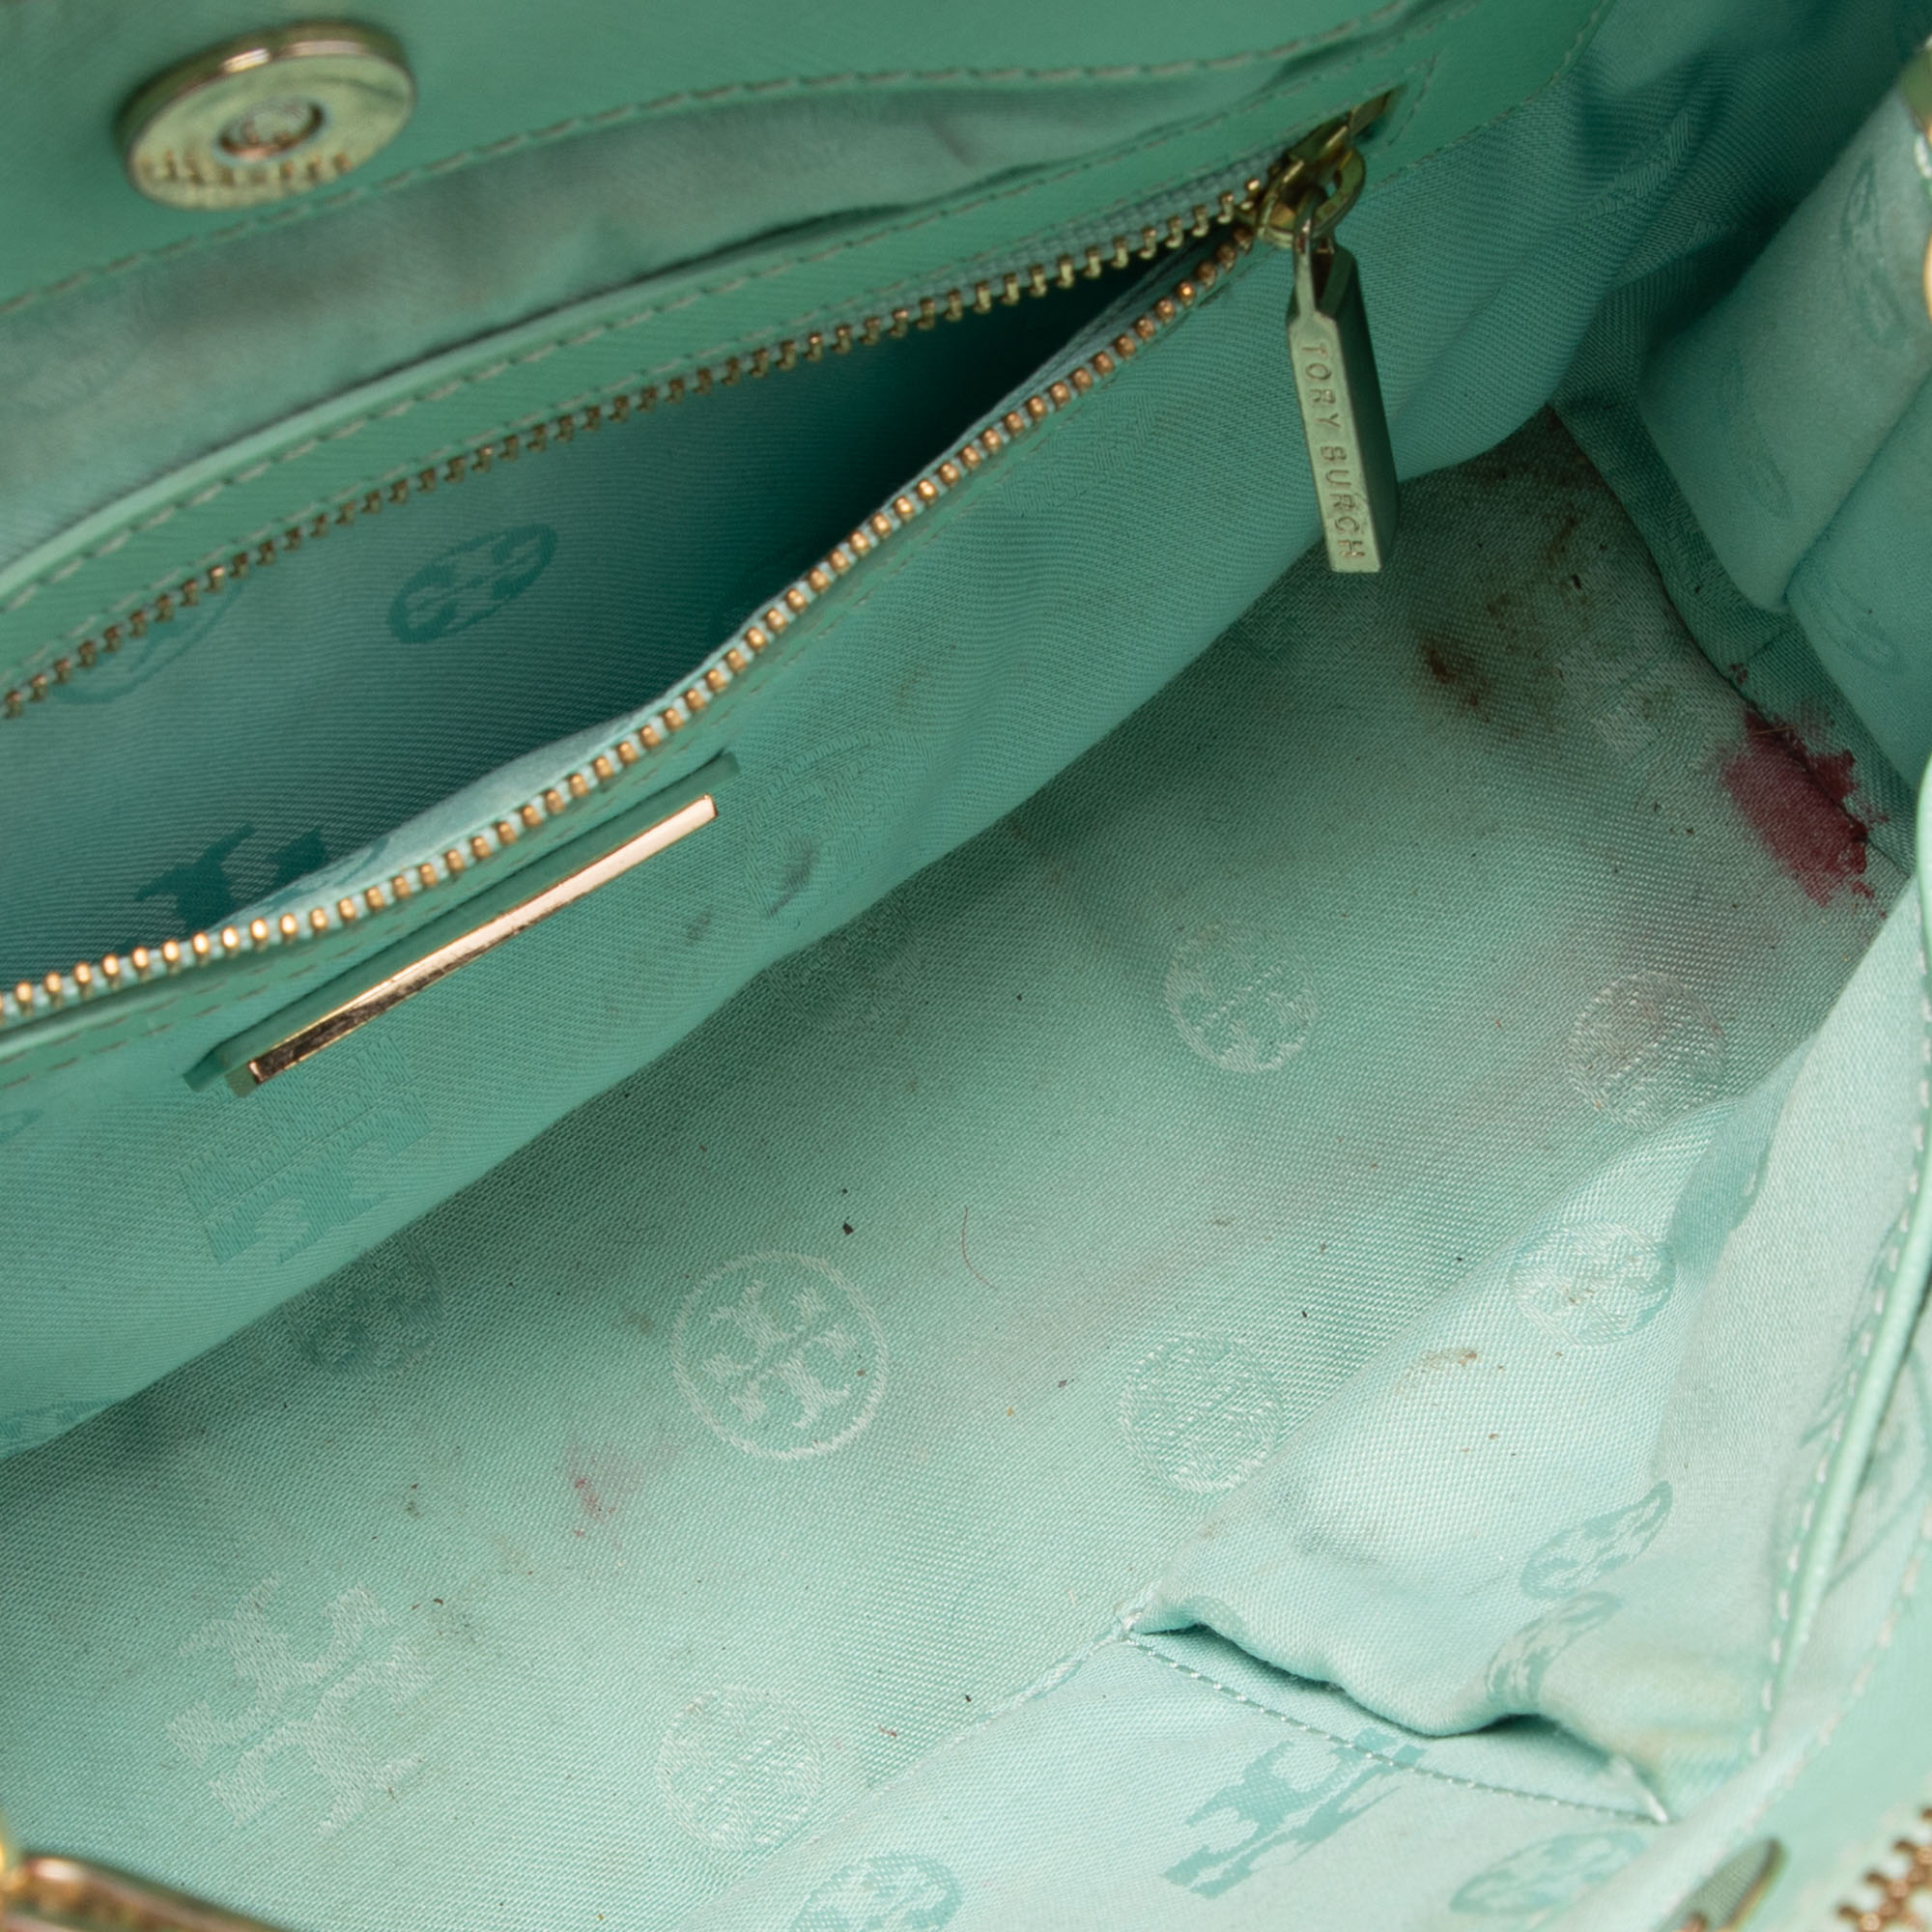 Tory Burch Light Green Leather Robinson Double Zip Tote